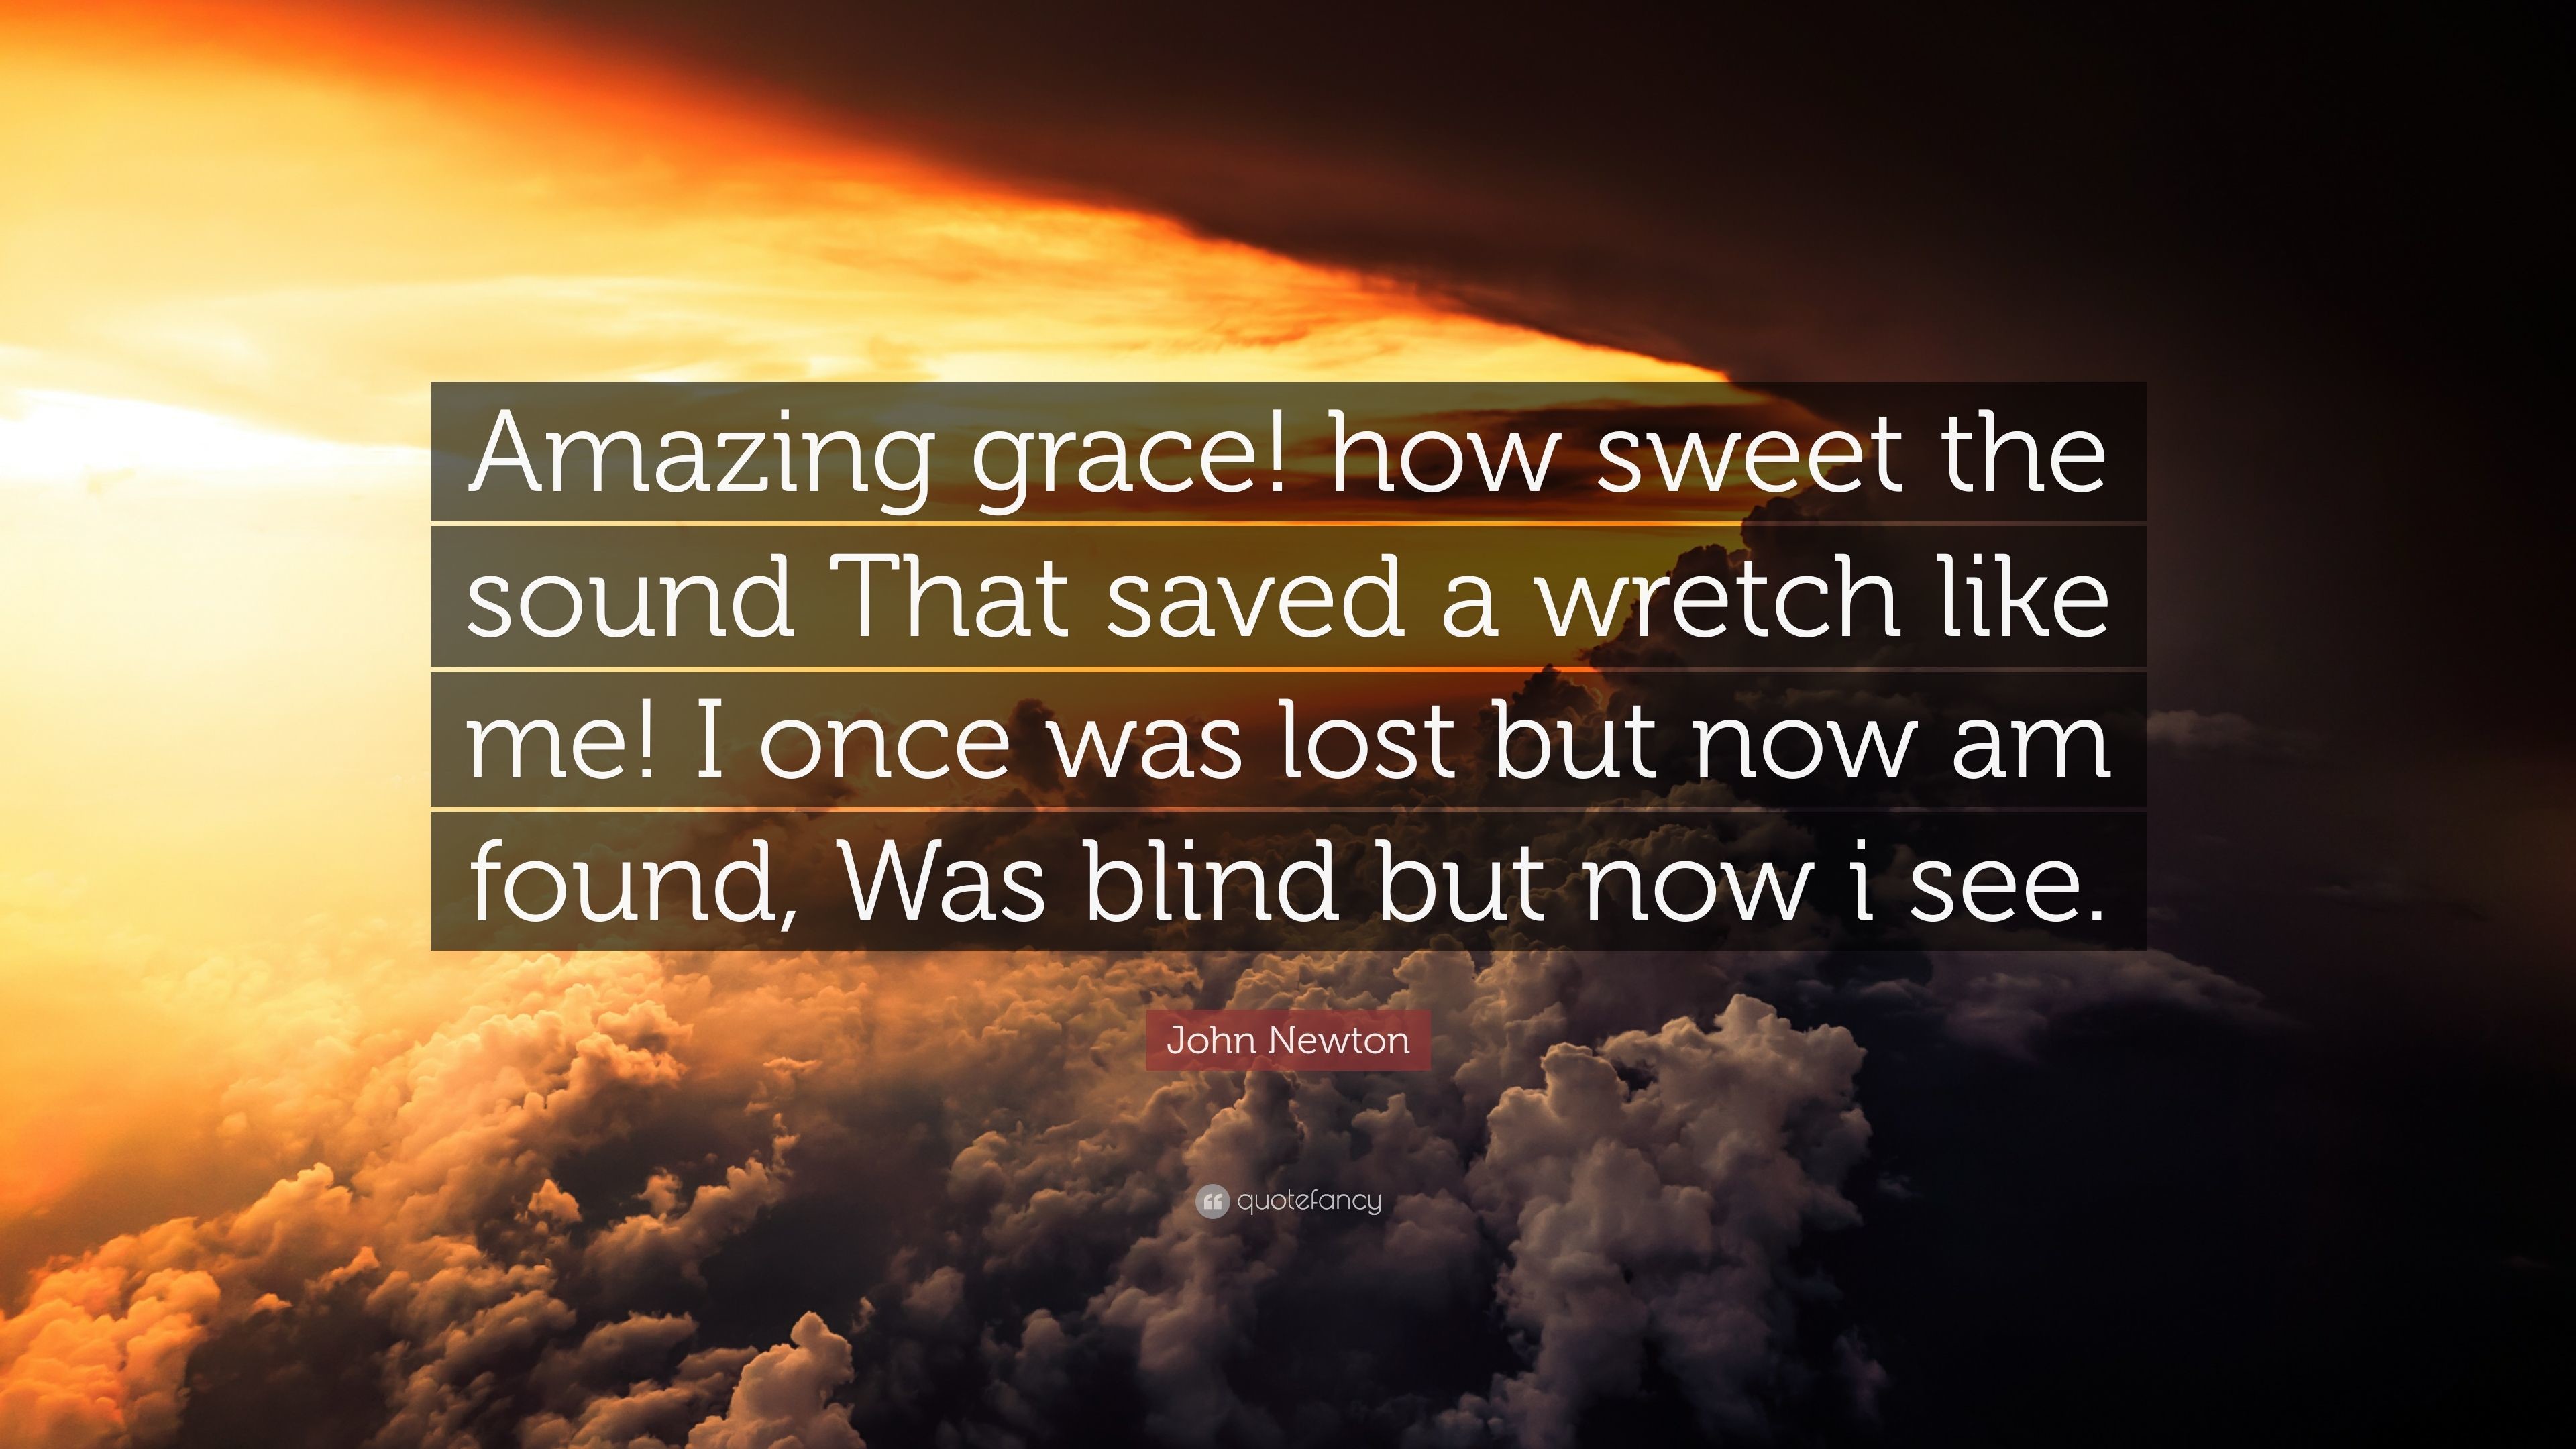 3840x2160 John Newton Quote: “Amazing grace! how sweet the sound That saved a wretch